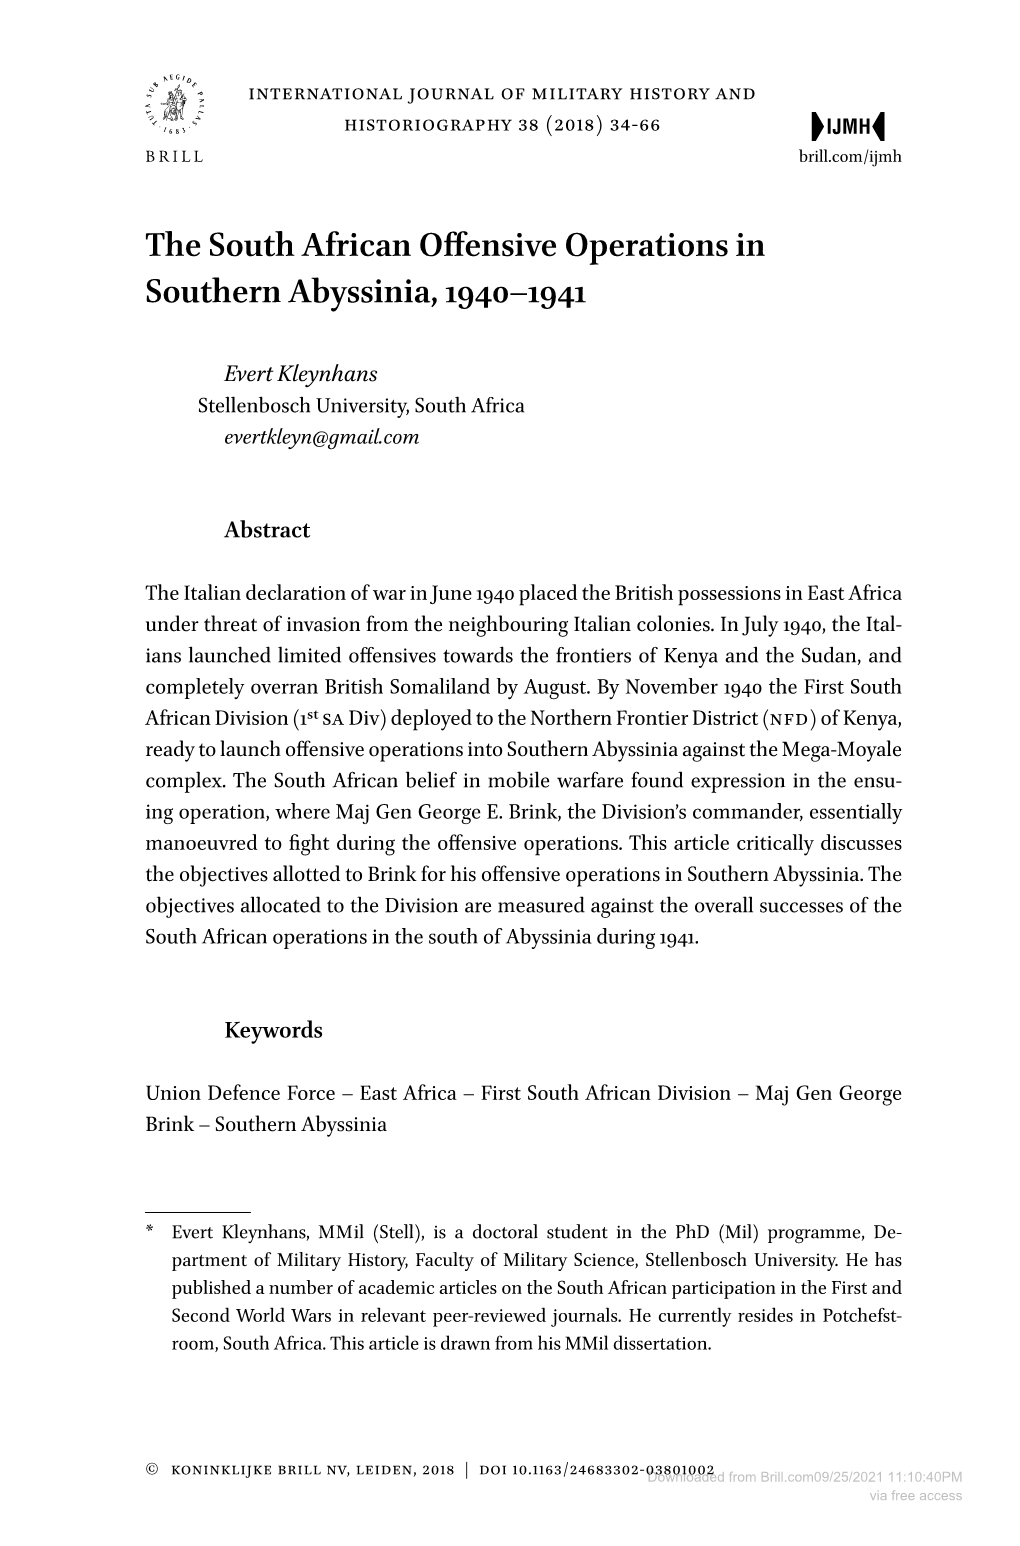 The South African Offensive Operations in Southern Abyssinia, 1940–1941